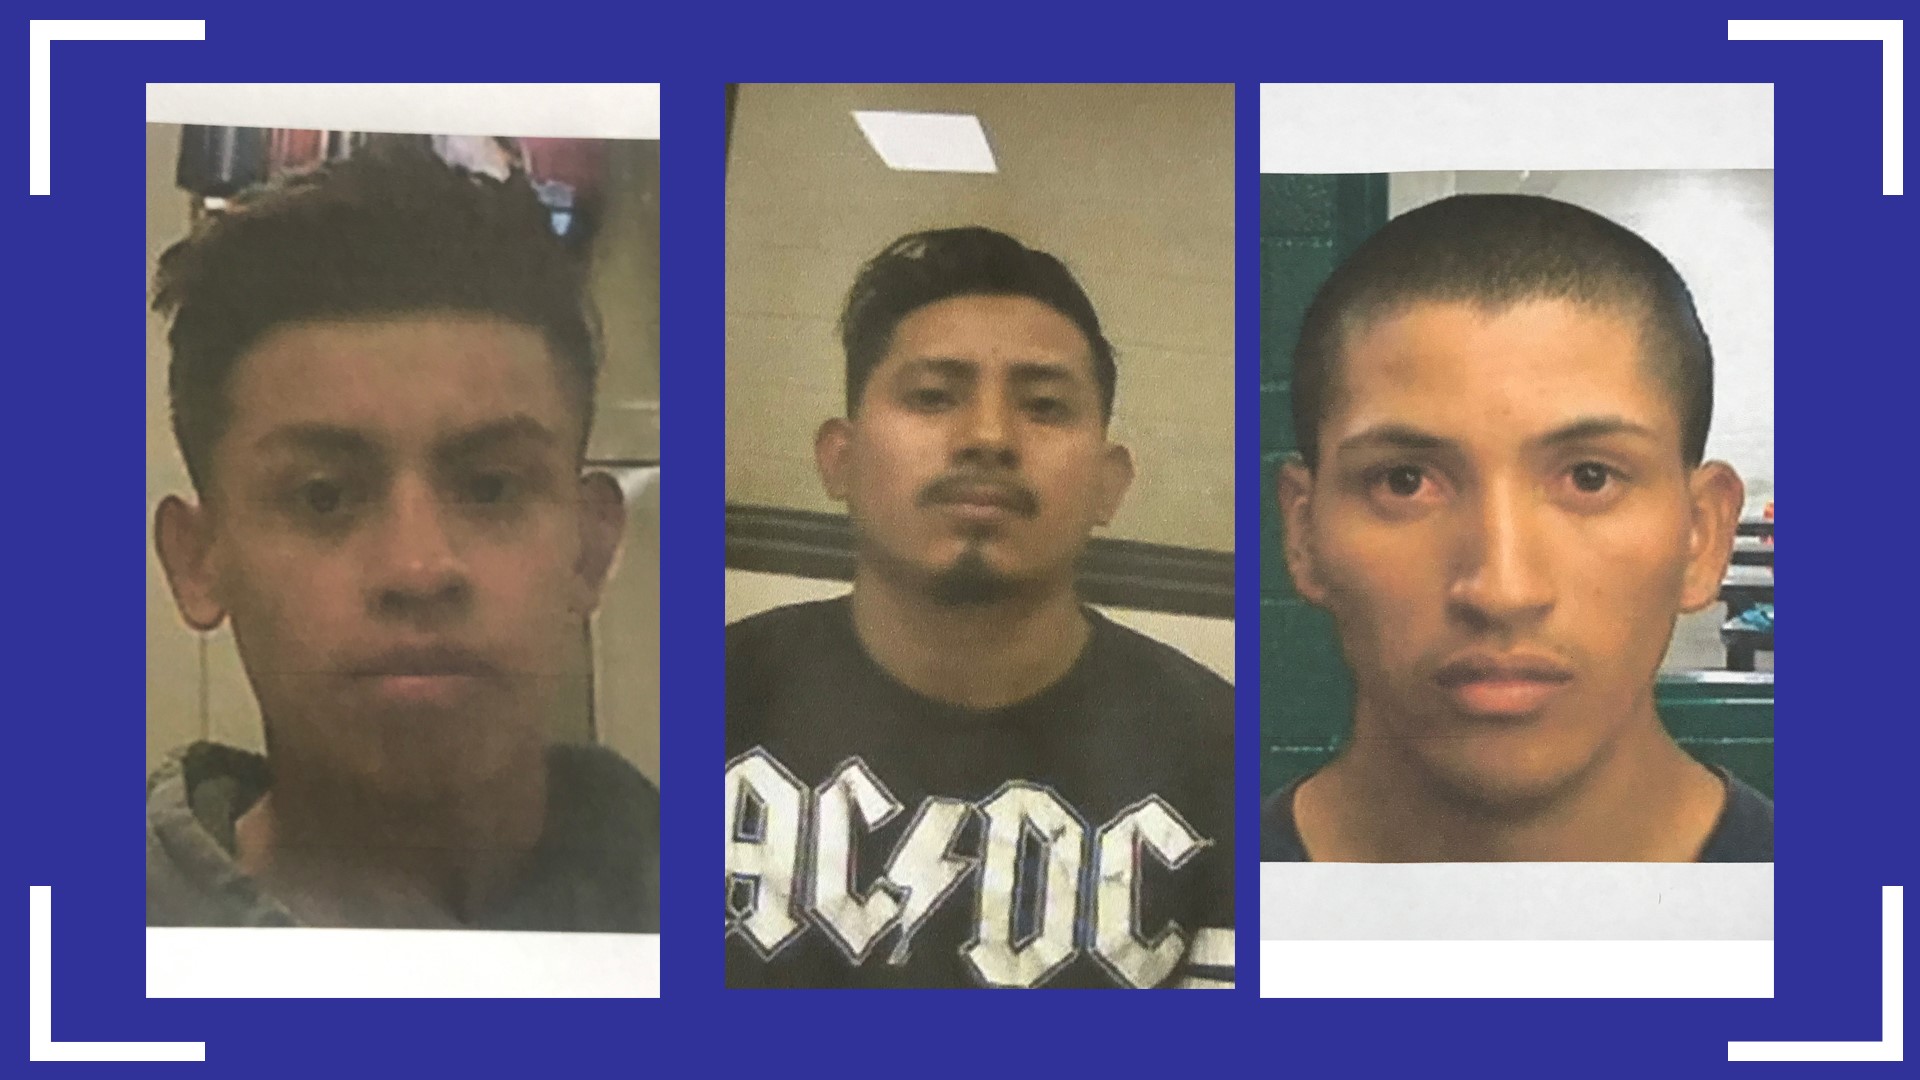 Amilcar Aguilar-Hernandez, 33, Douglas Amaya-Arriago, 18, and Carlos Perez-Rodriguez, 18, are on the run after escaping from the Aurora ICE facility.